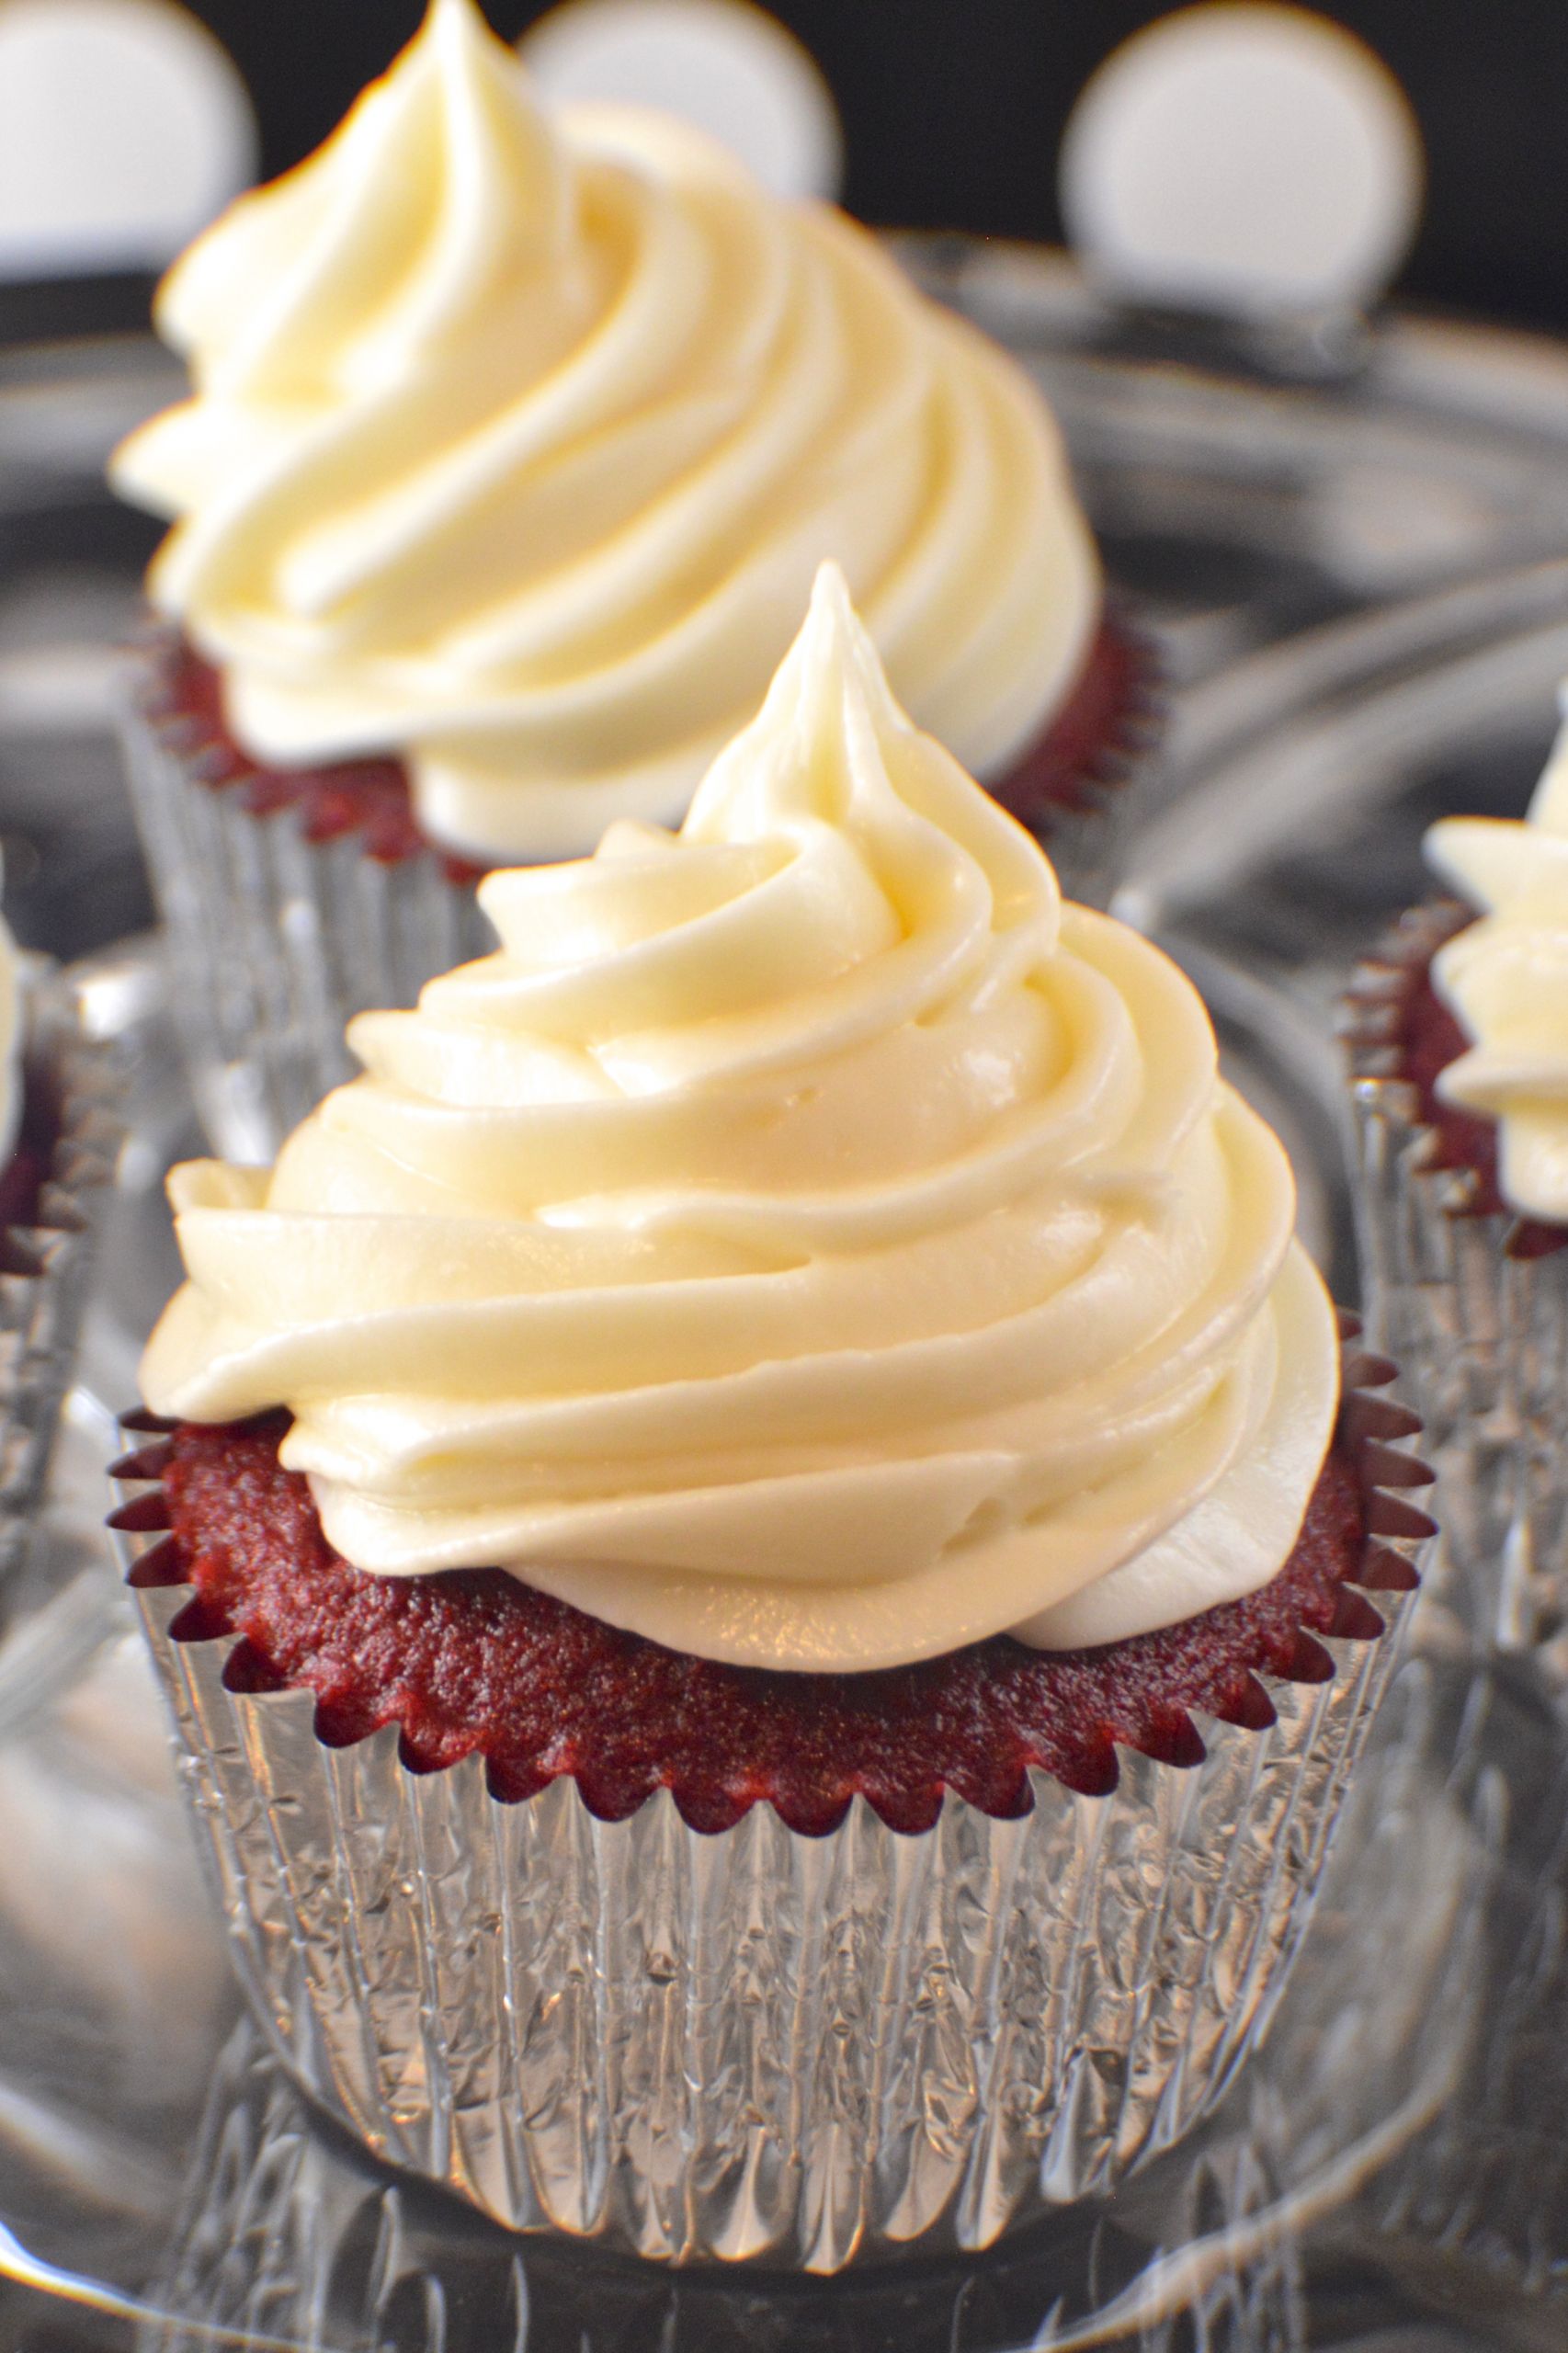 Red Velvet Cupcakes With Cream Cheese Frosting
 Red Velvet Cupcakes with Homemade Cream Cheese Frosting